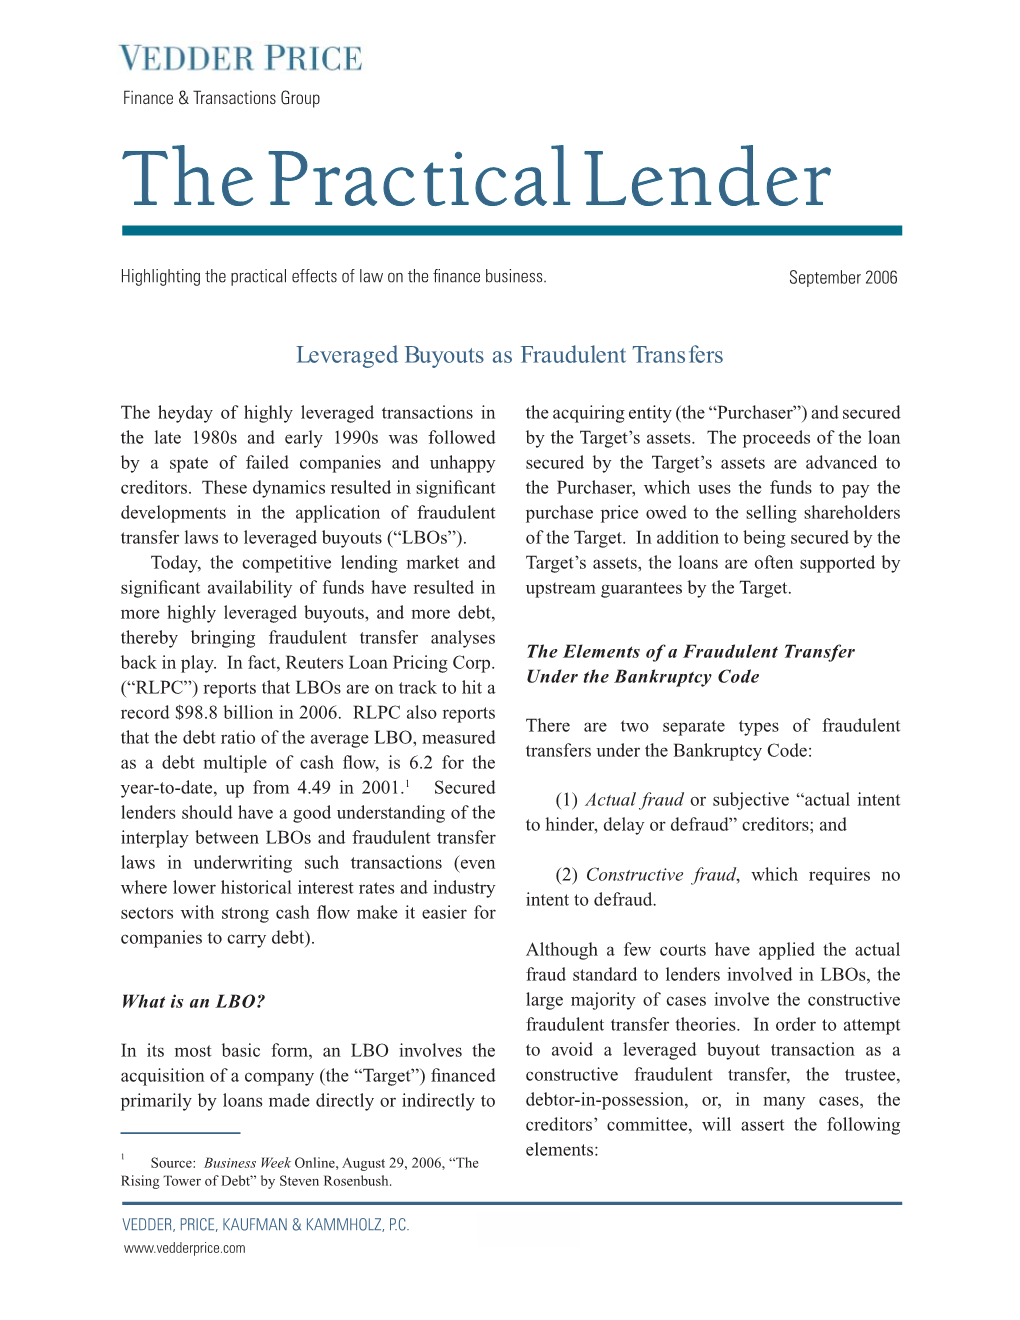 Leveraged Buyouts As Fraudulent Transfers